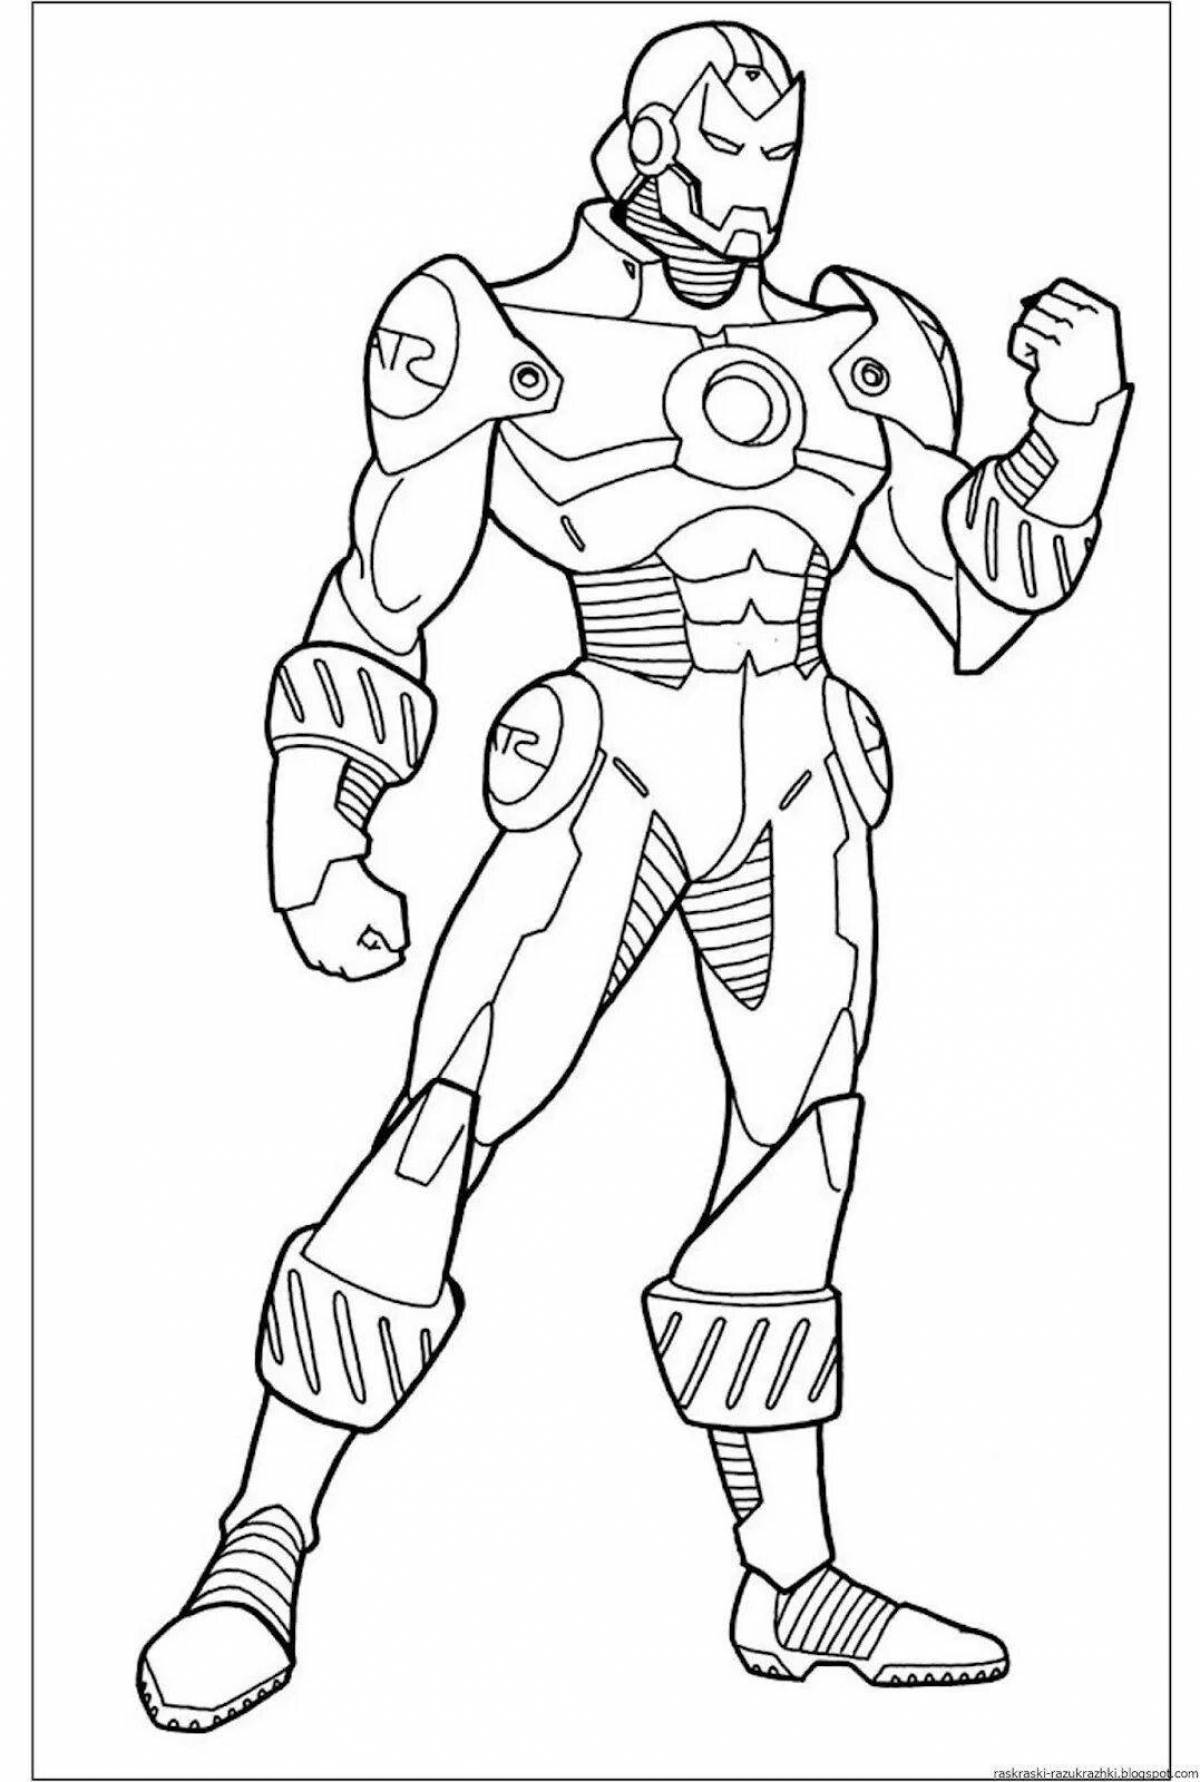 Fabulous superhero coloring pages for 5-6 year olds